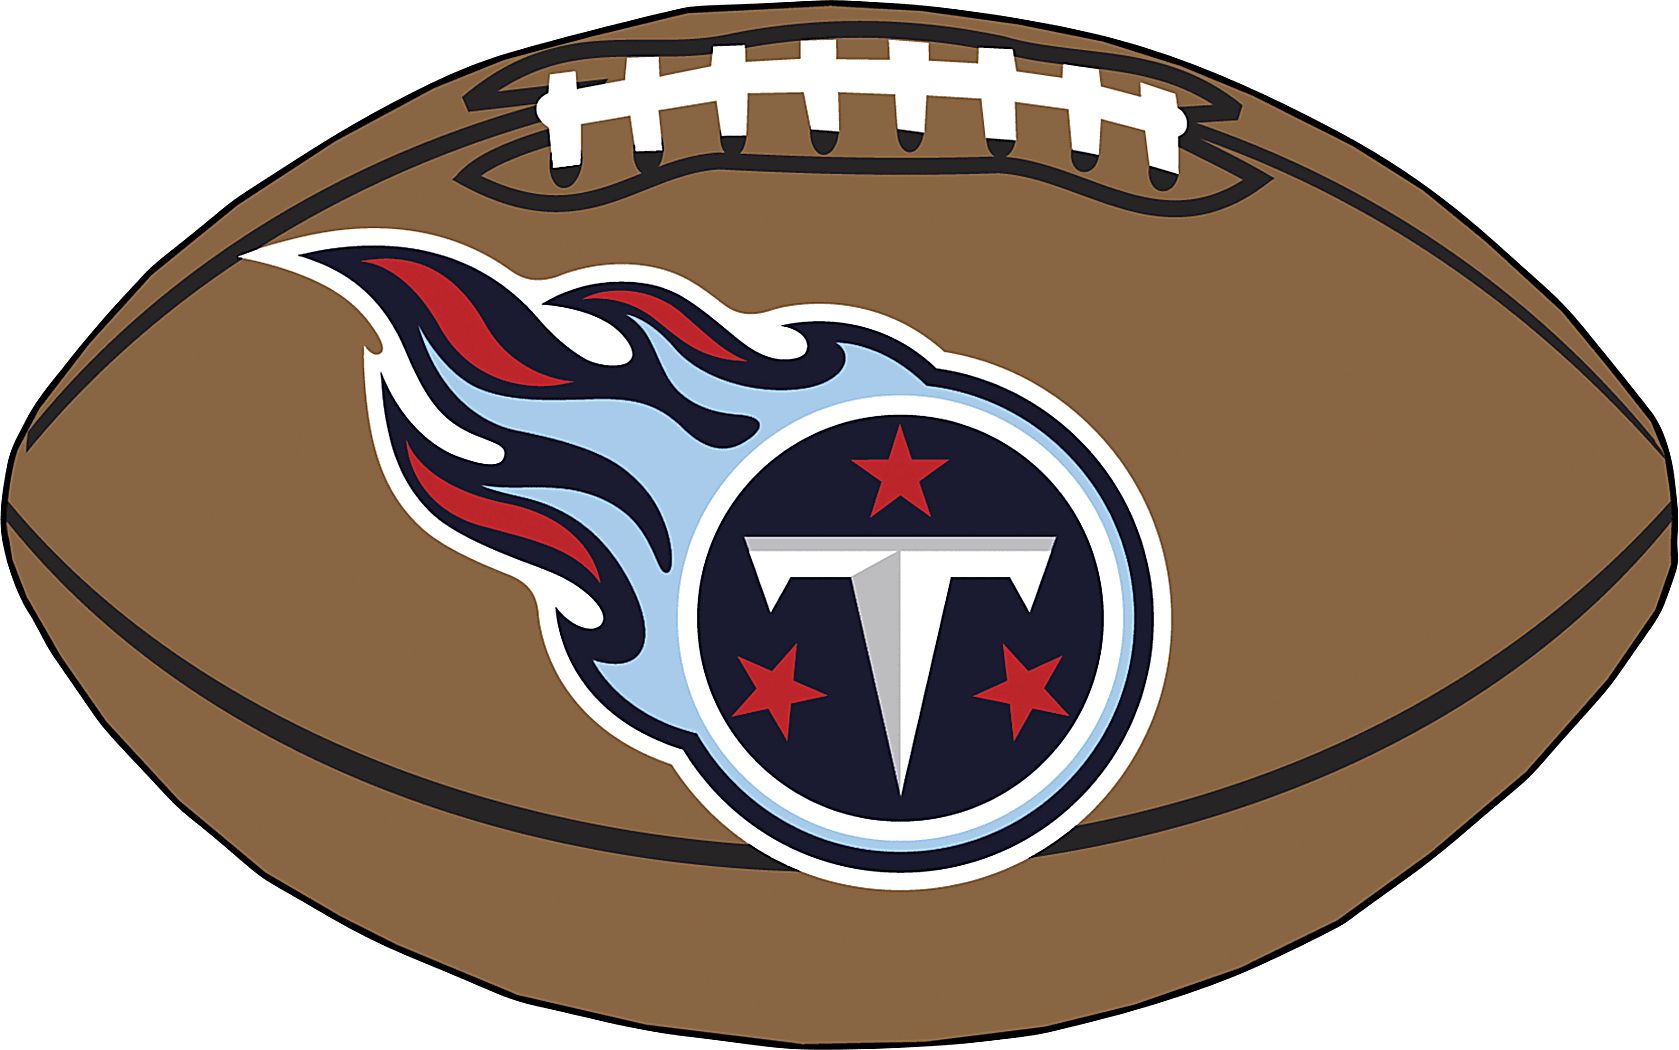 NFL Football Mascot Tennessee Titans 1'6 x 1'10 Rug Rooms To Go